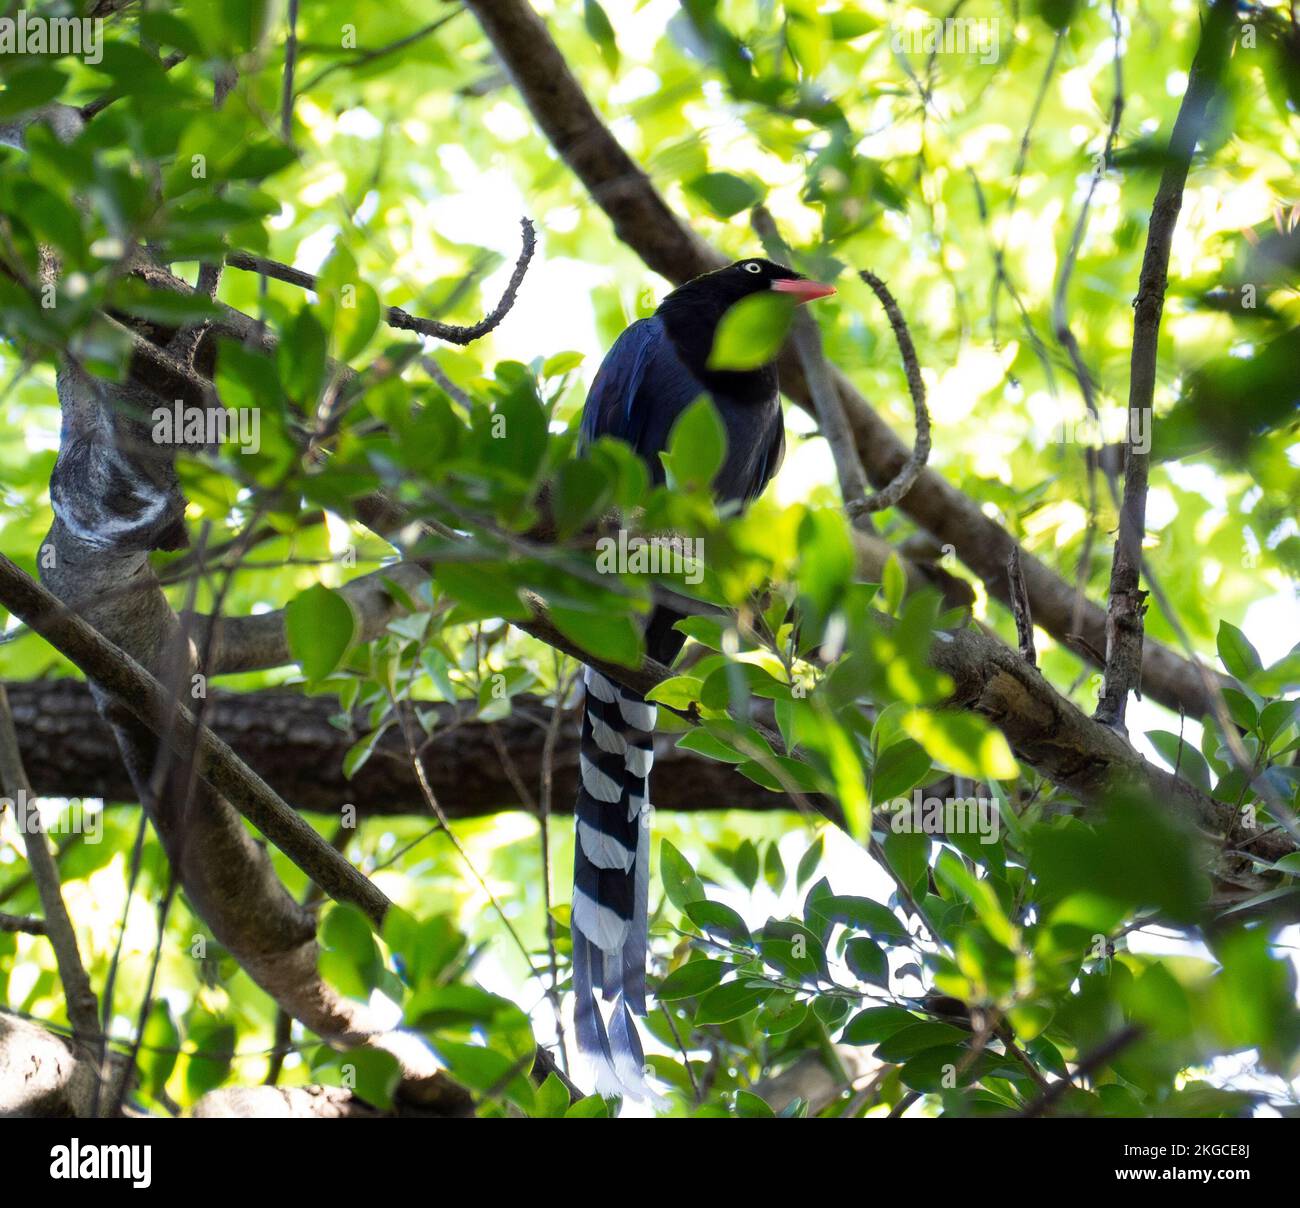 A Taiwan blue magpie perched on a tree branch. Stock Photo